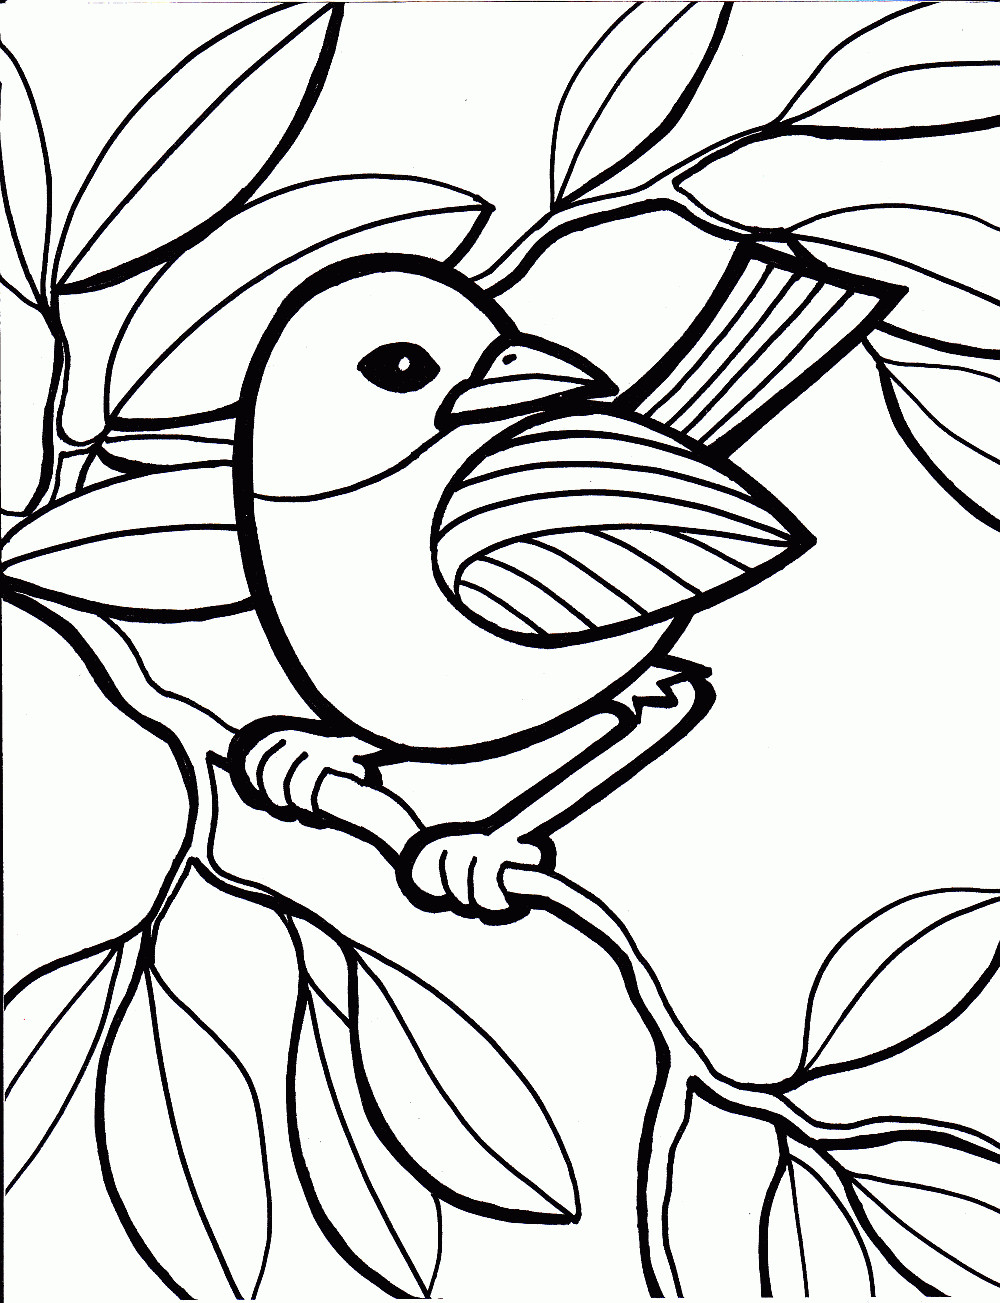 Printable Coloring Pages For Elderly
 Printable Coloring Pages For Elderly Coloring Pages